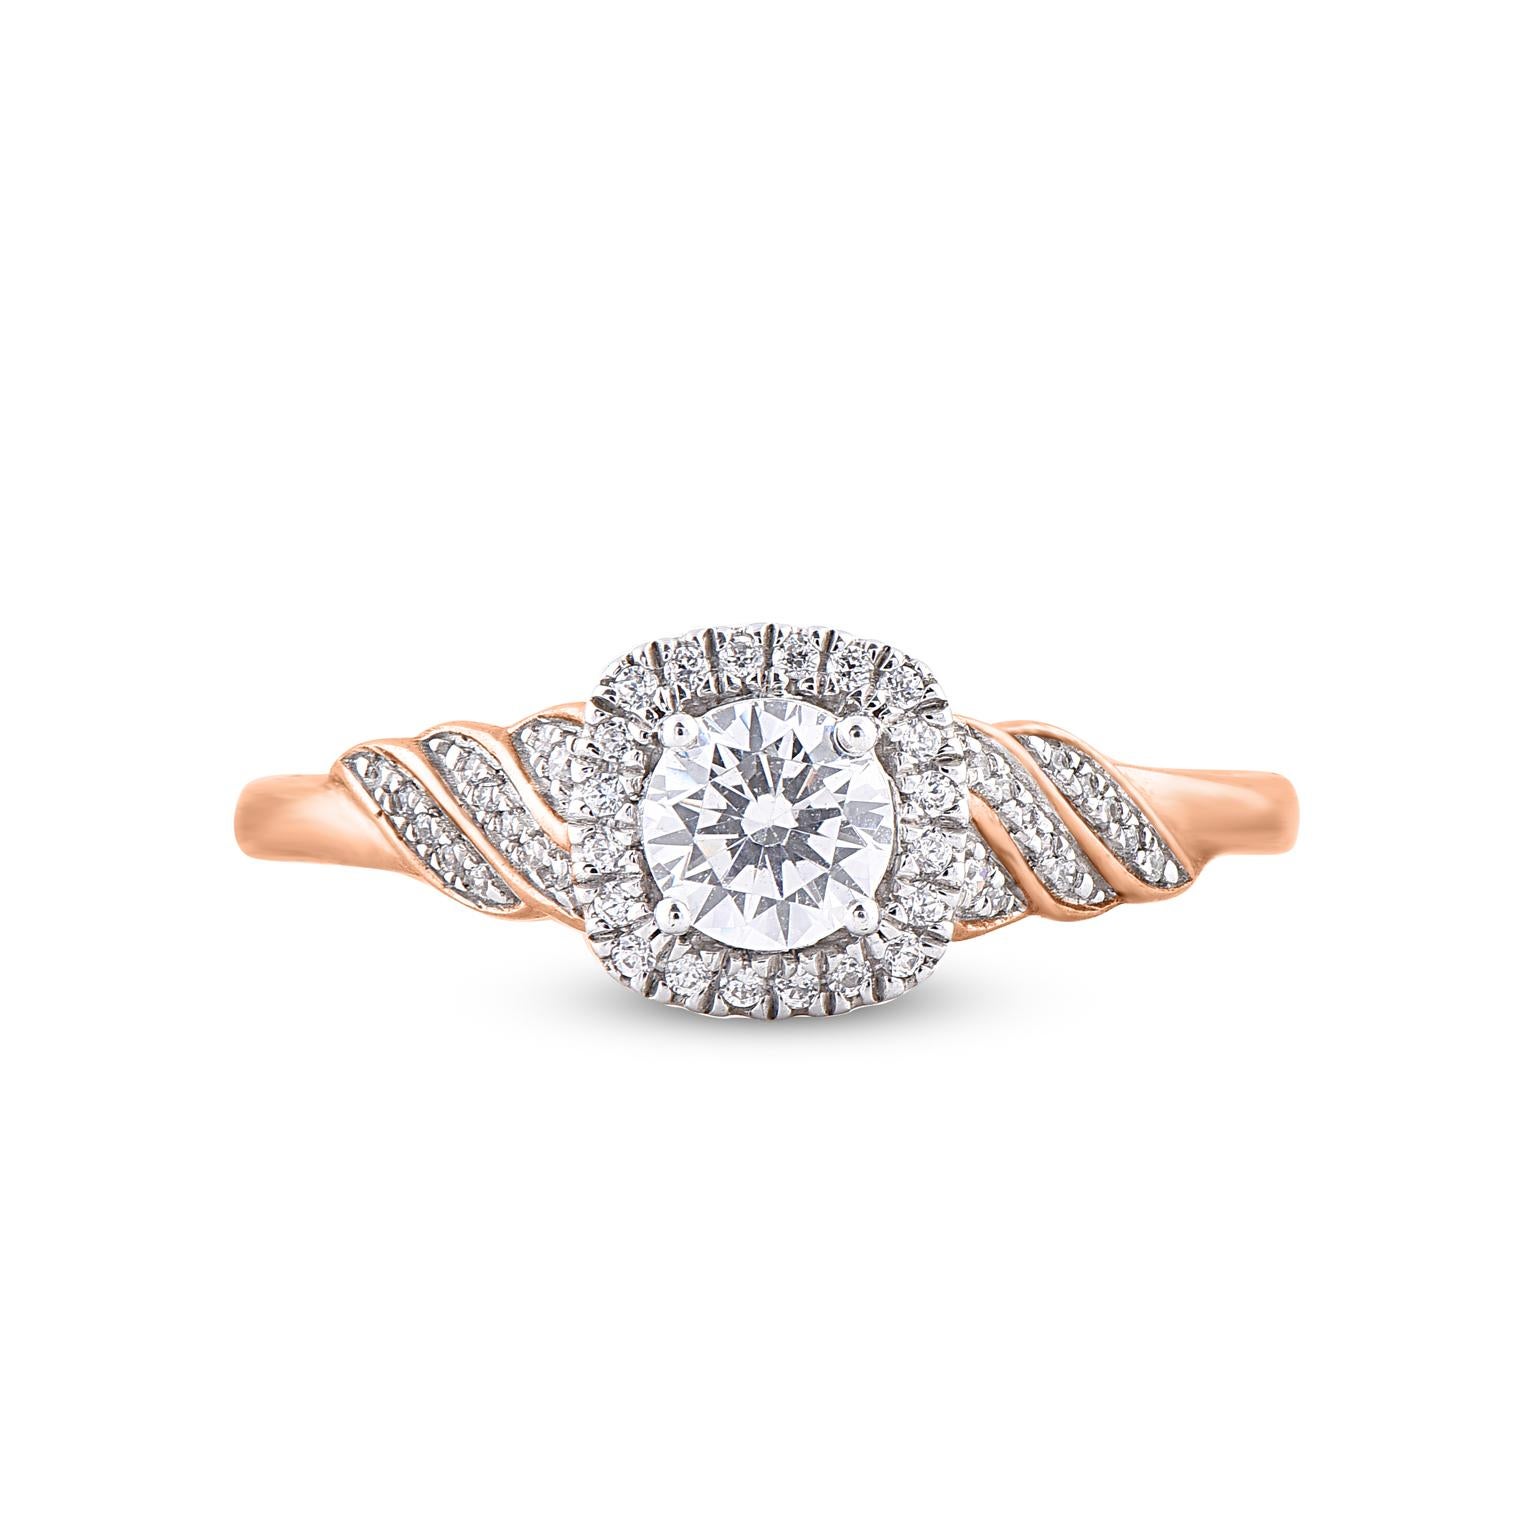 Make the moment memorable with this diamond engagement ring. Expertly crafted in 14 Karat rose gold and shines with 45 brilliant cut and single cut diamond in prong and pave setting. The total weight of diamonds 0.50 carat, H-I color and I2 Clarity.